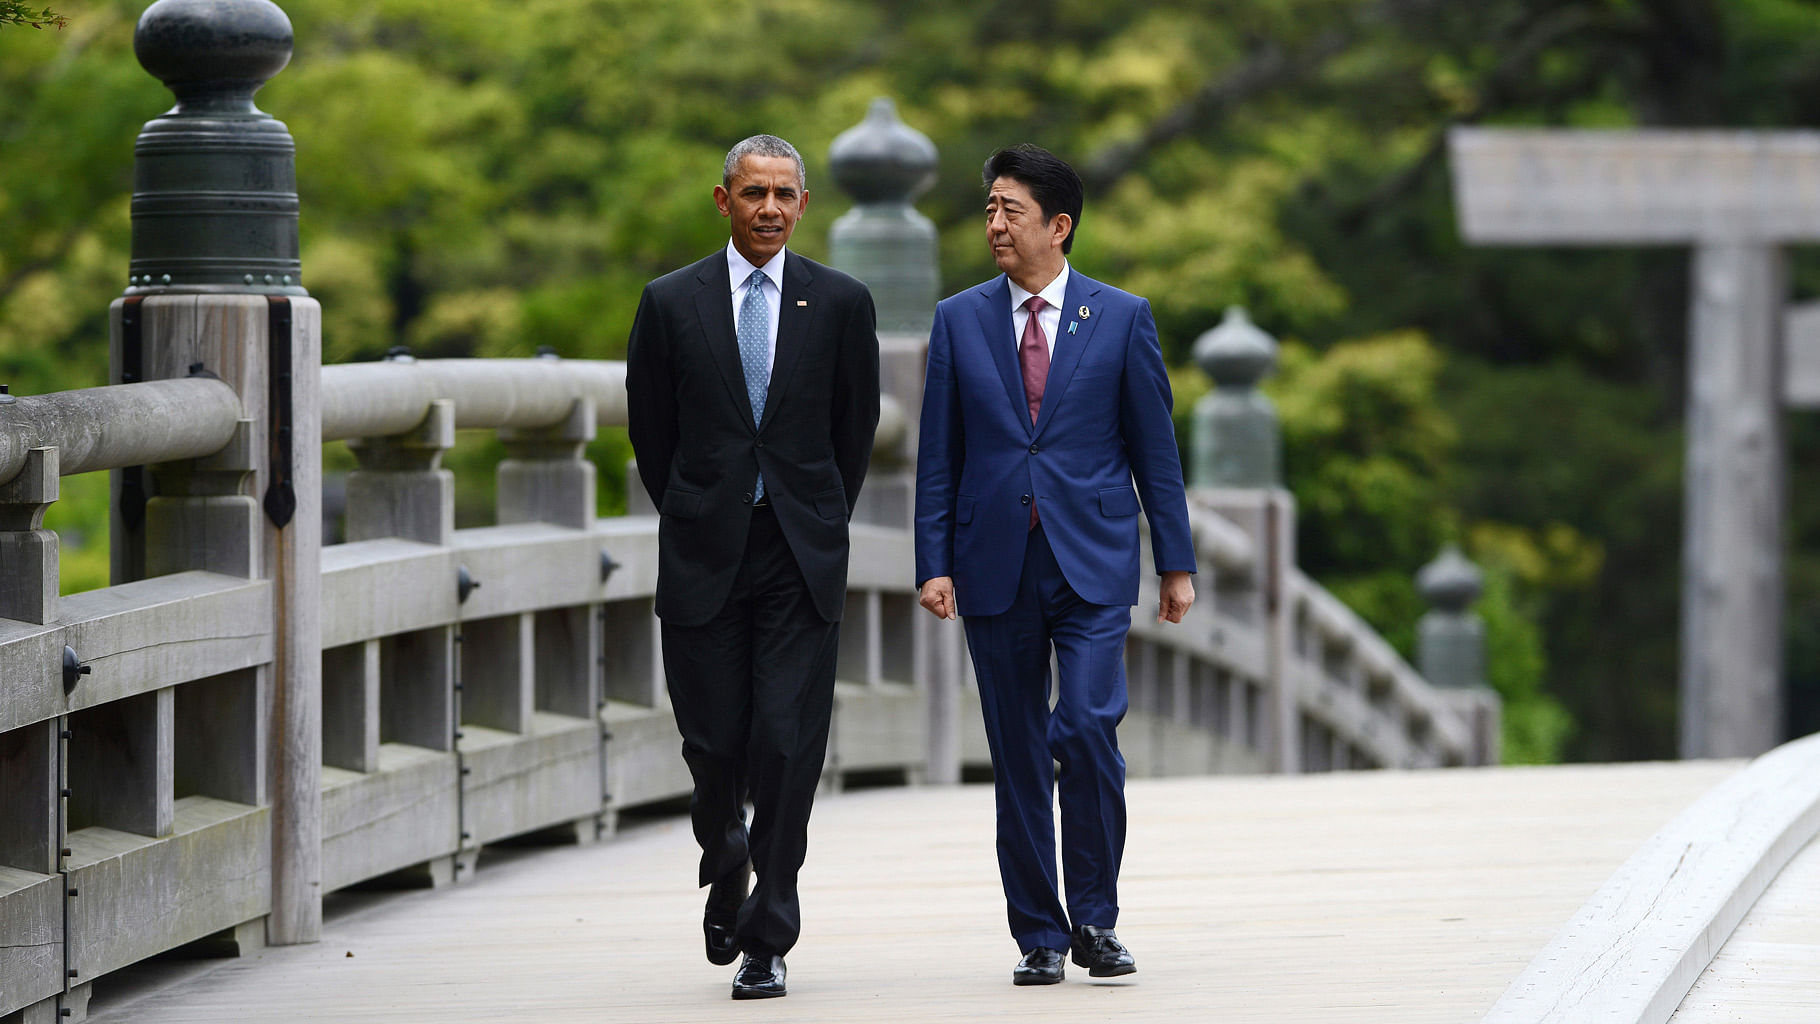 US President Barack Obama (left) and Japanese Prime Minister Shinzo Abe arrive to the Ise Grand Shrine in Ise, Japan during the G-7 Summit on 26 May 2016. (Sean Kilpatrick/The Canadian Press via AP)